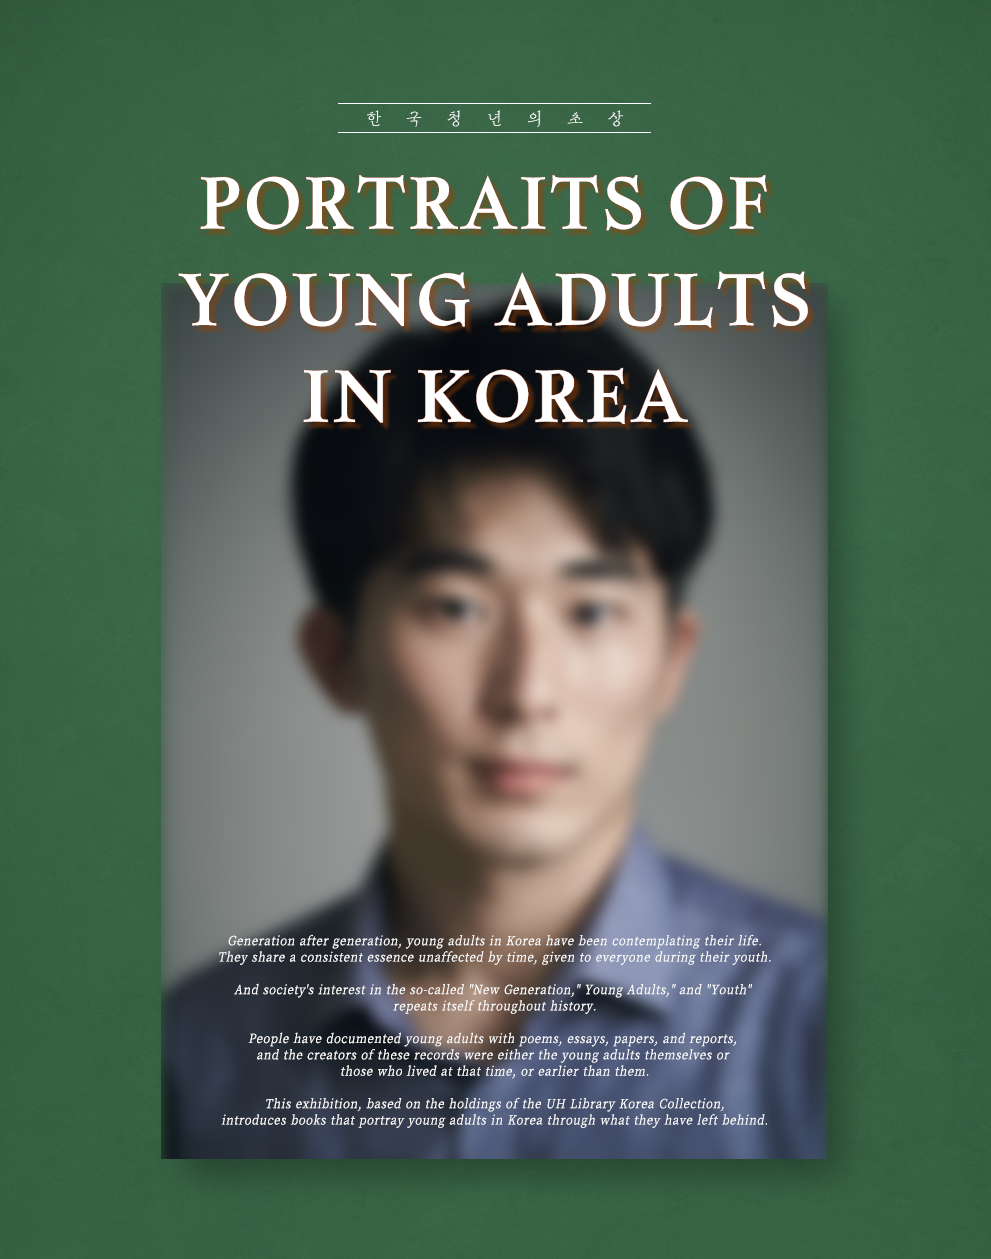 Portraits of young adults in Korea